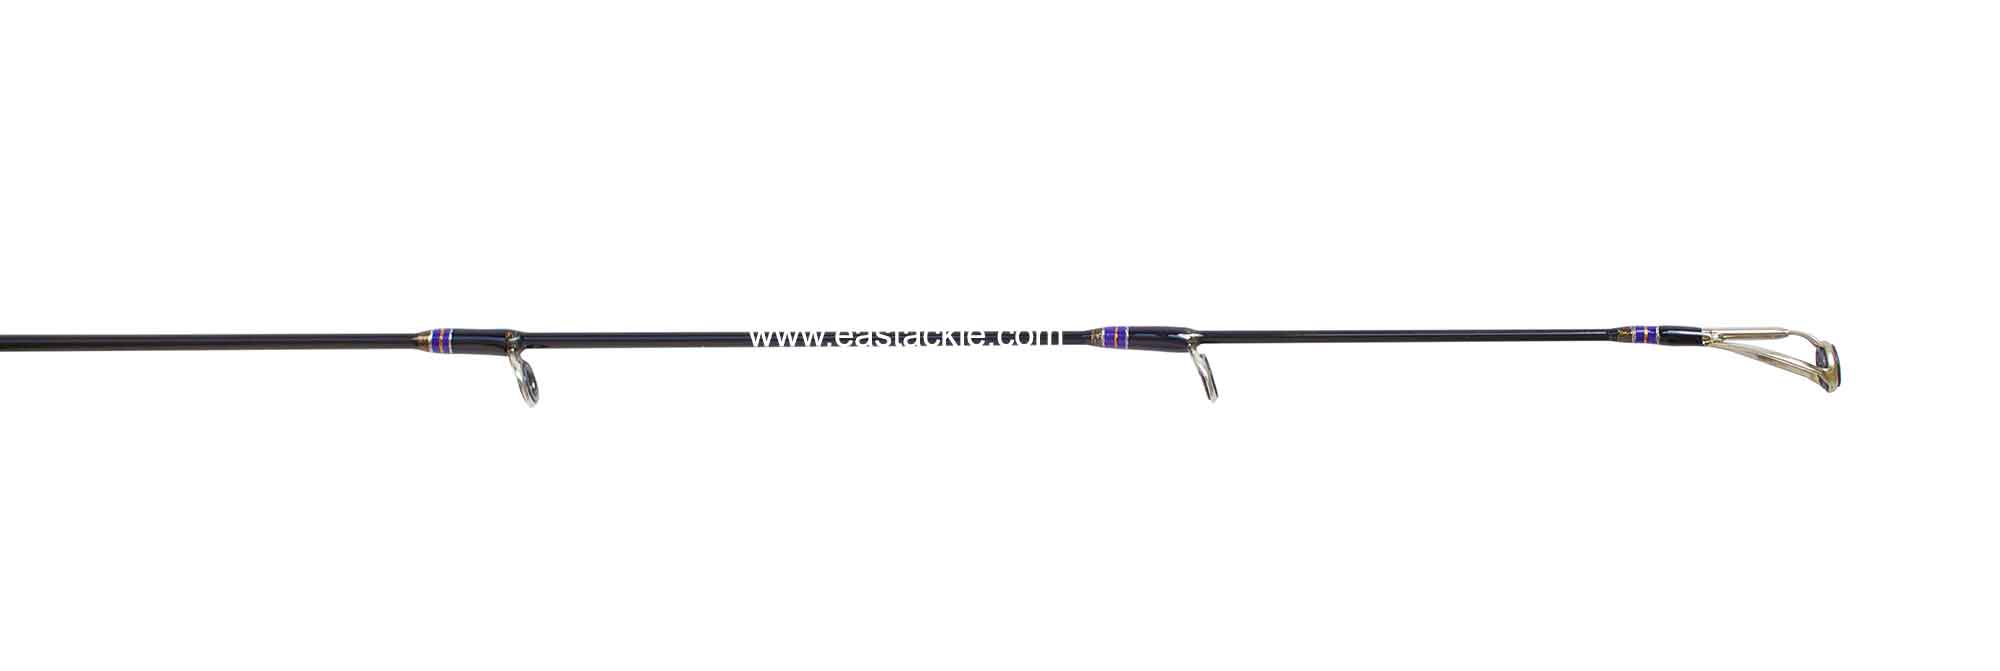 Megabass - Silver Shadow XX - 66ML - Saltwater - Spinning - Fishing Rod - Tip Section